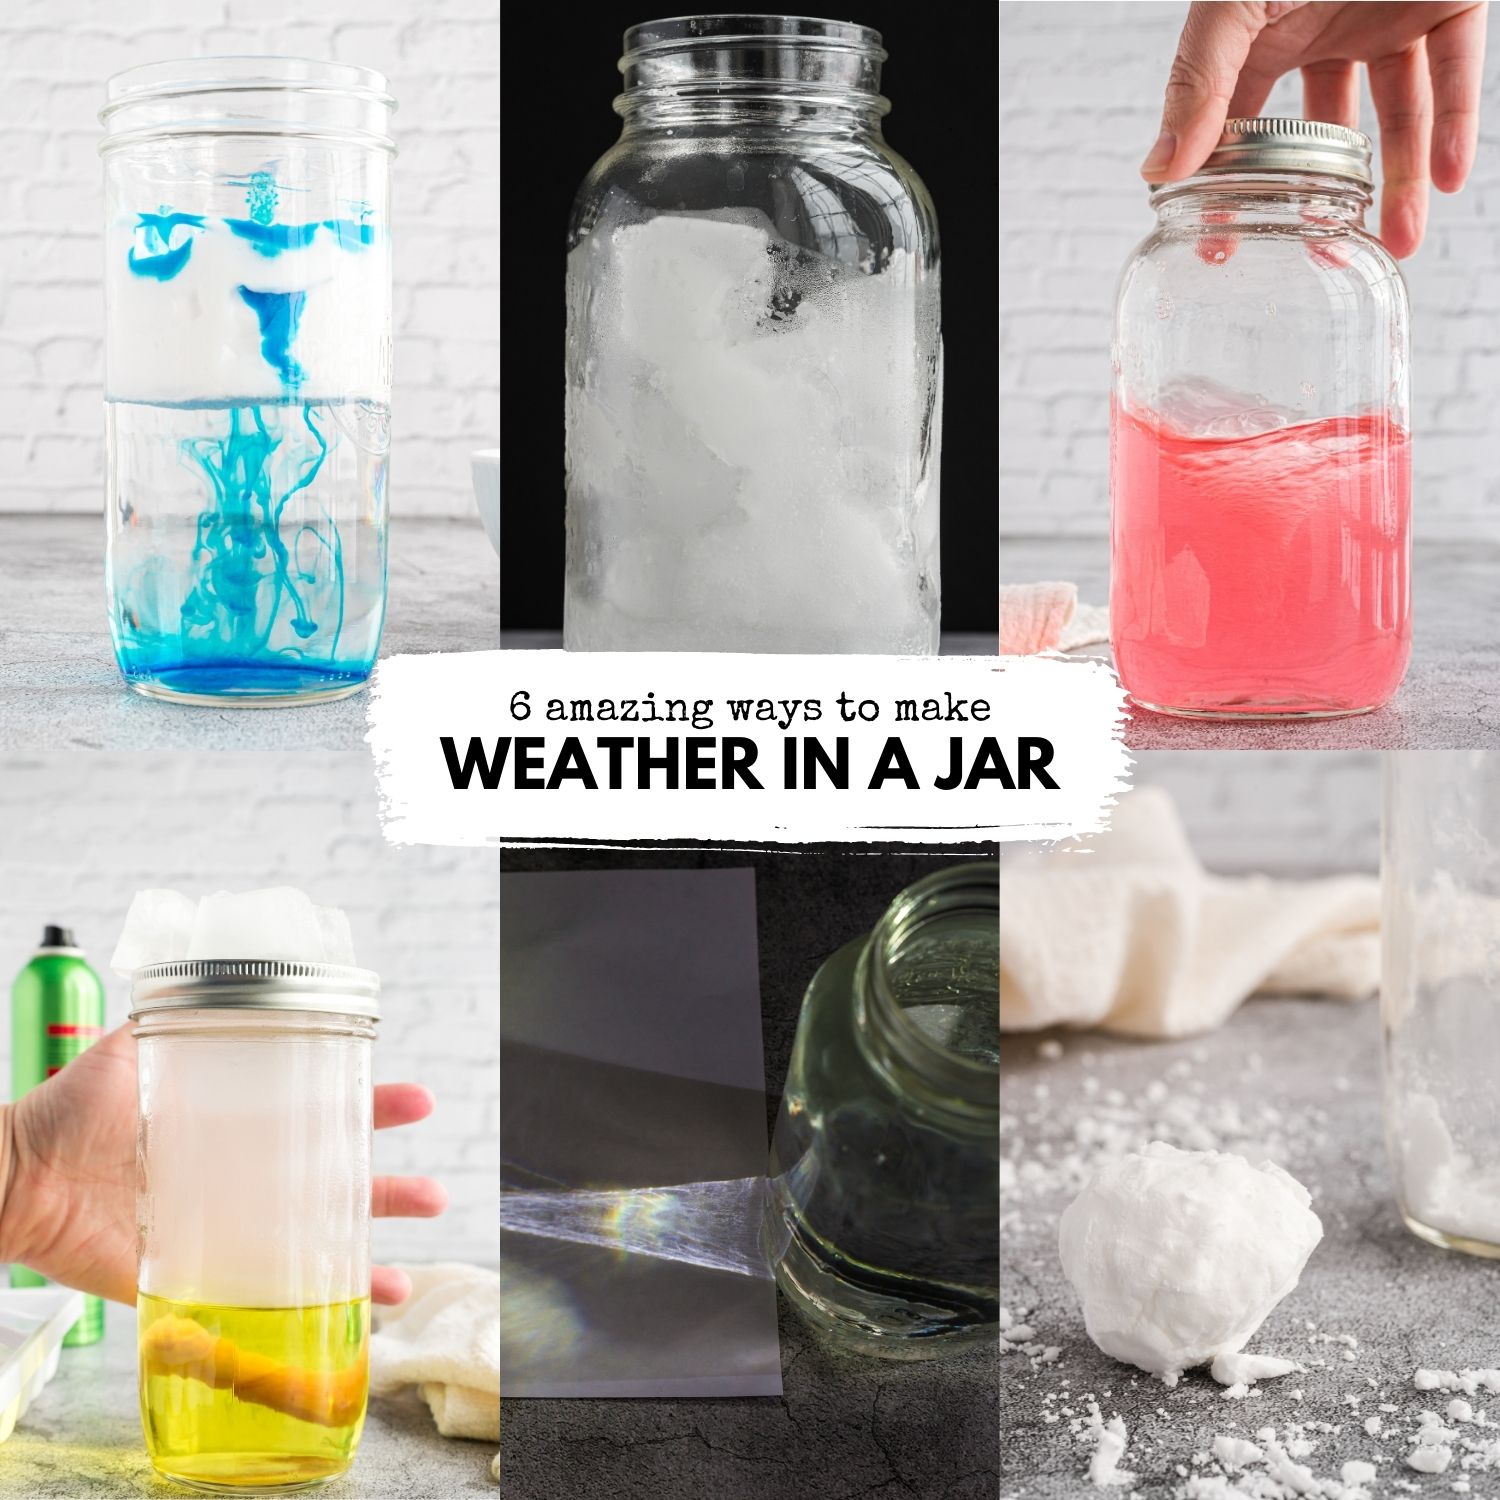 Kids will love these 6 amazing weather in a jar science experiments. Try rain in a jar, fake snow, make rainbows, clouds, tornadoes, and more!